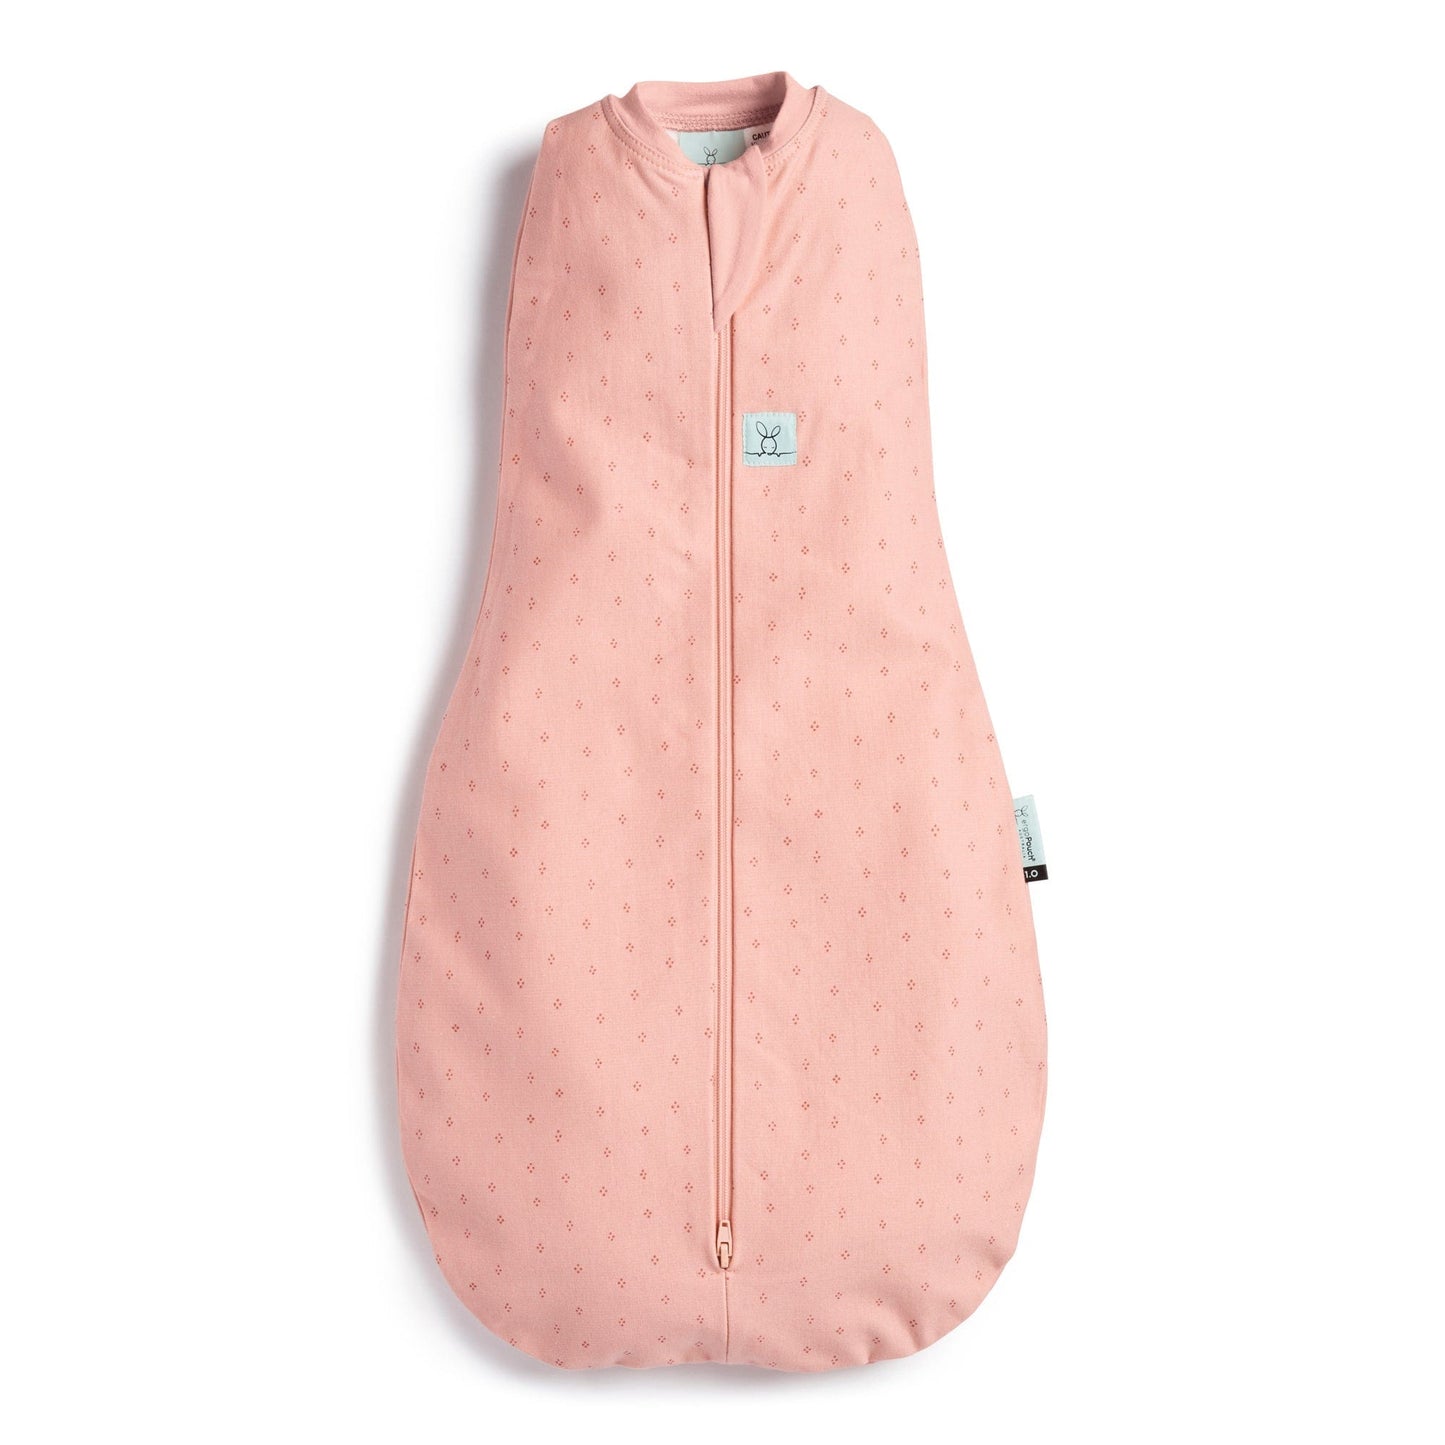 ErgoPouch - Cocoon Swaddle Bag - Berries - 1 TOG - Stylemykid.com